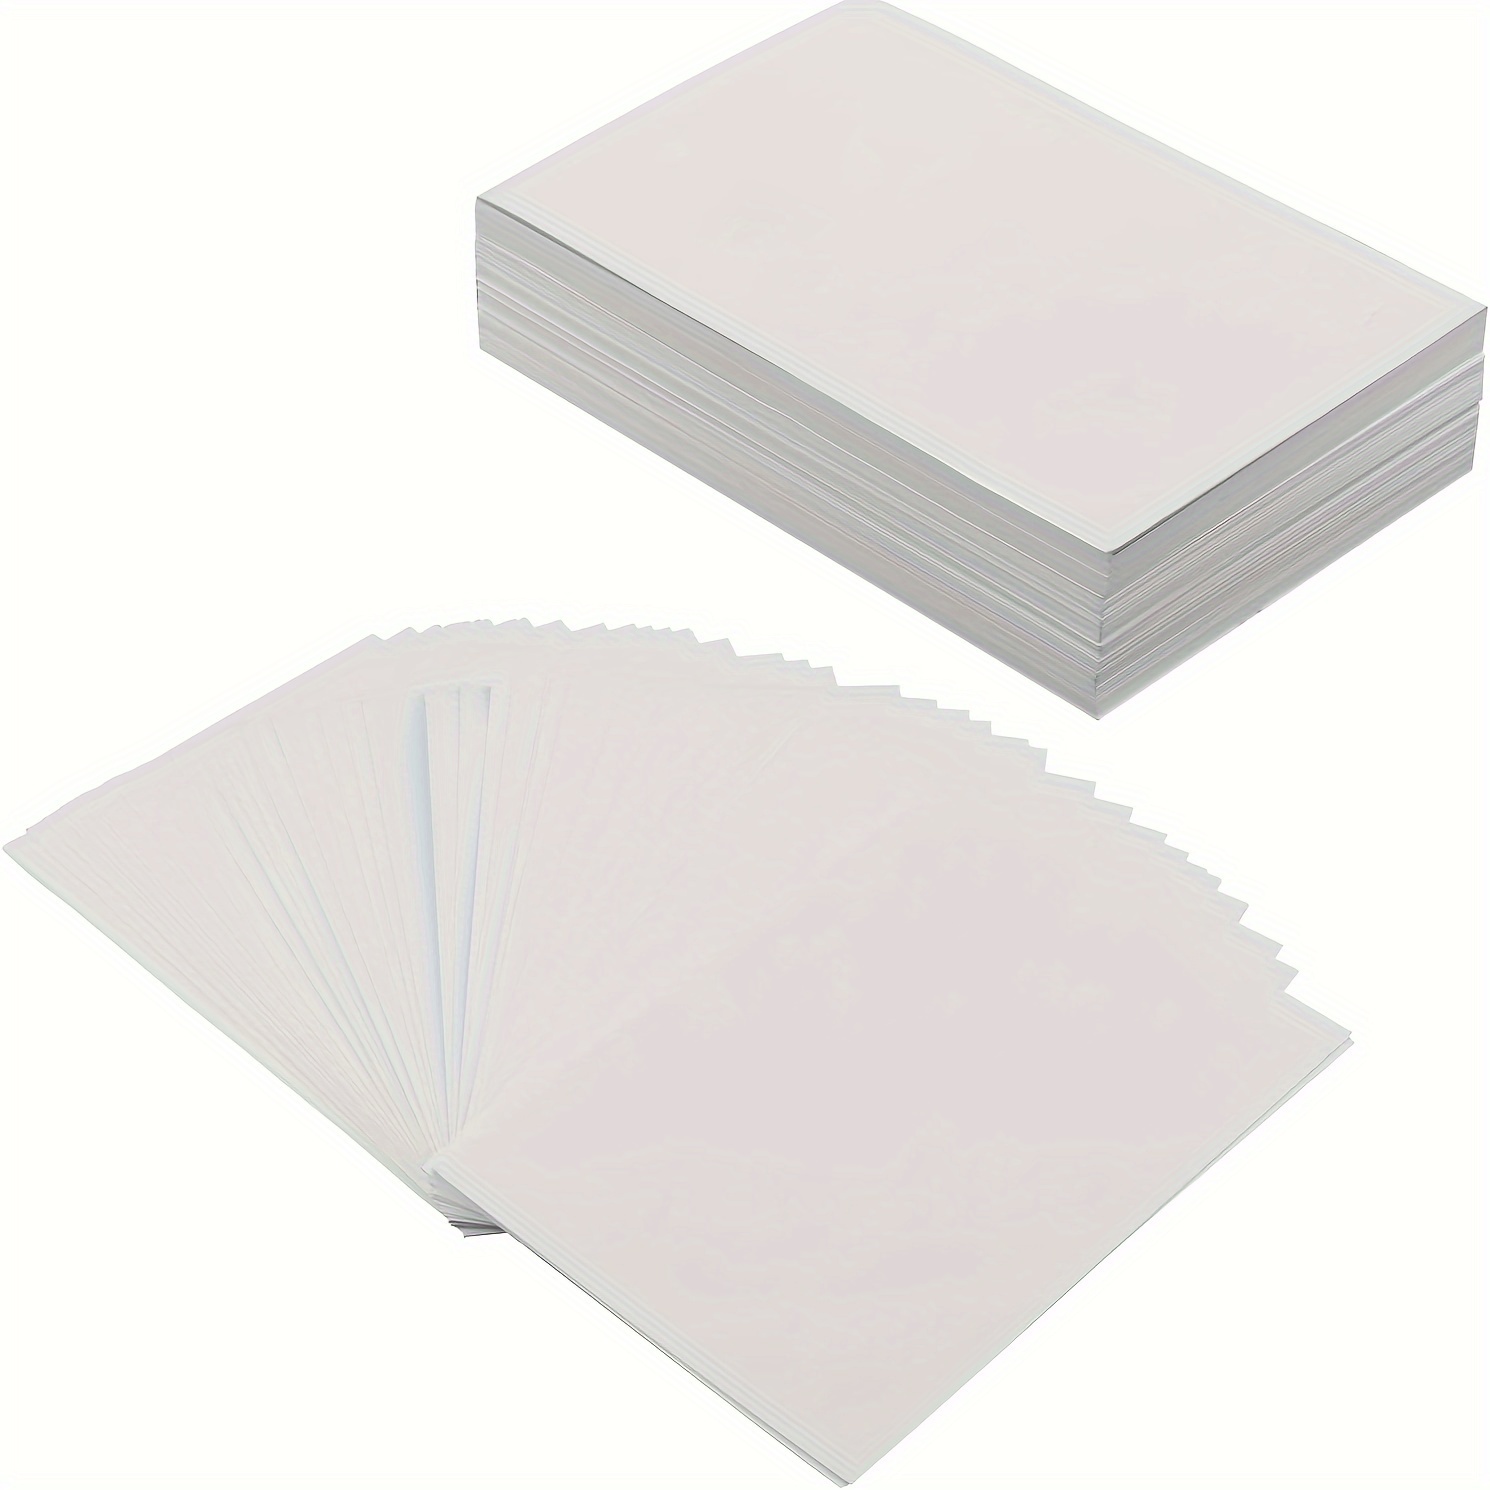 

50 Sheets White Blank Cardstock 4x6 In Thick Paper, 250gsm/90lb Flat Card Stock Printer Paper For Invitations, Postcards, Photo Paper, Diy Card Making